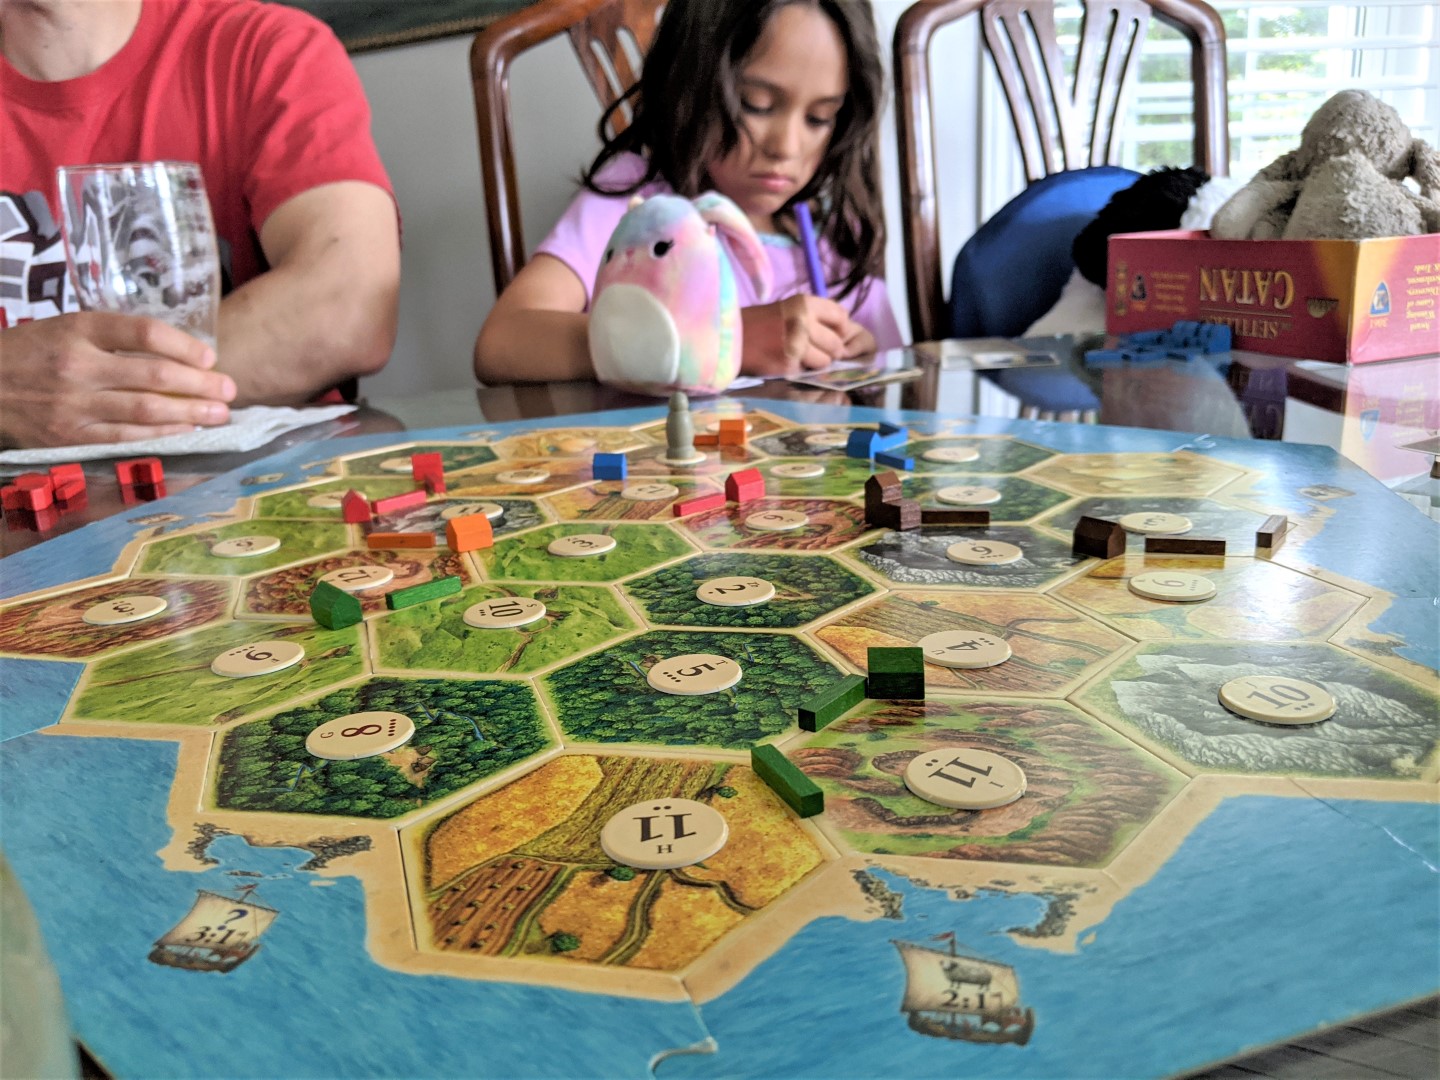 Child and stuffy in front of family board game Catan